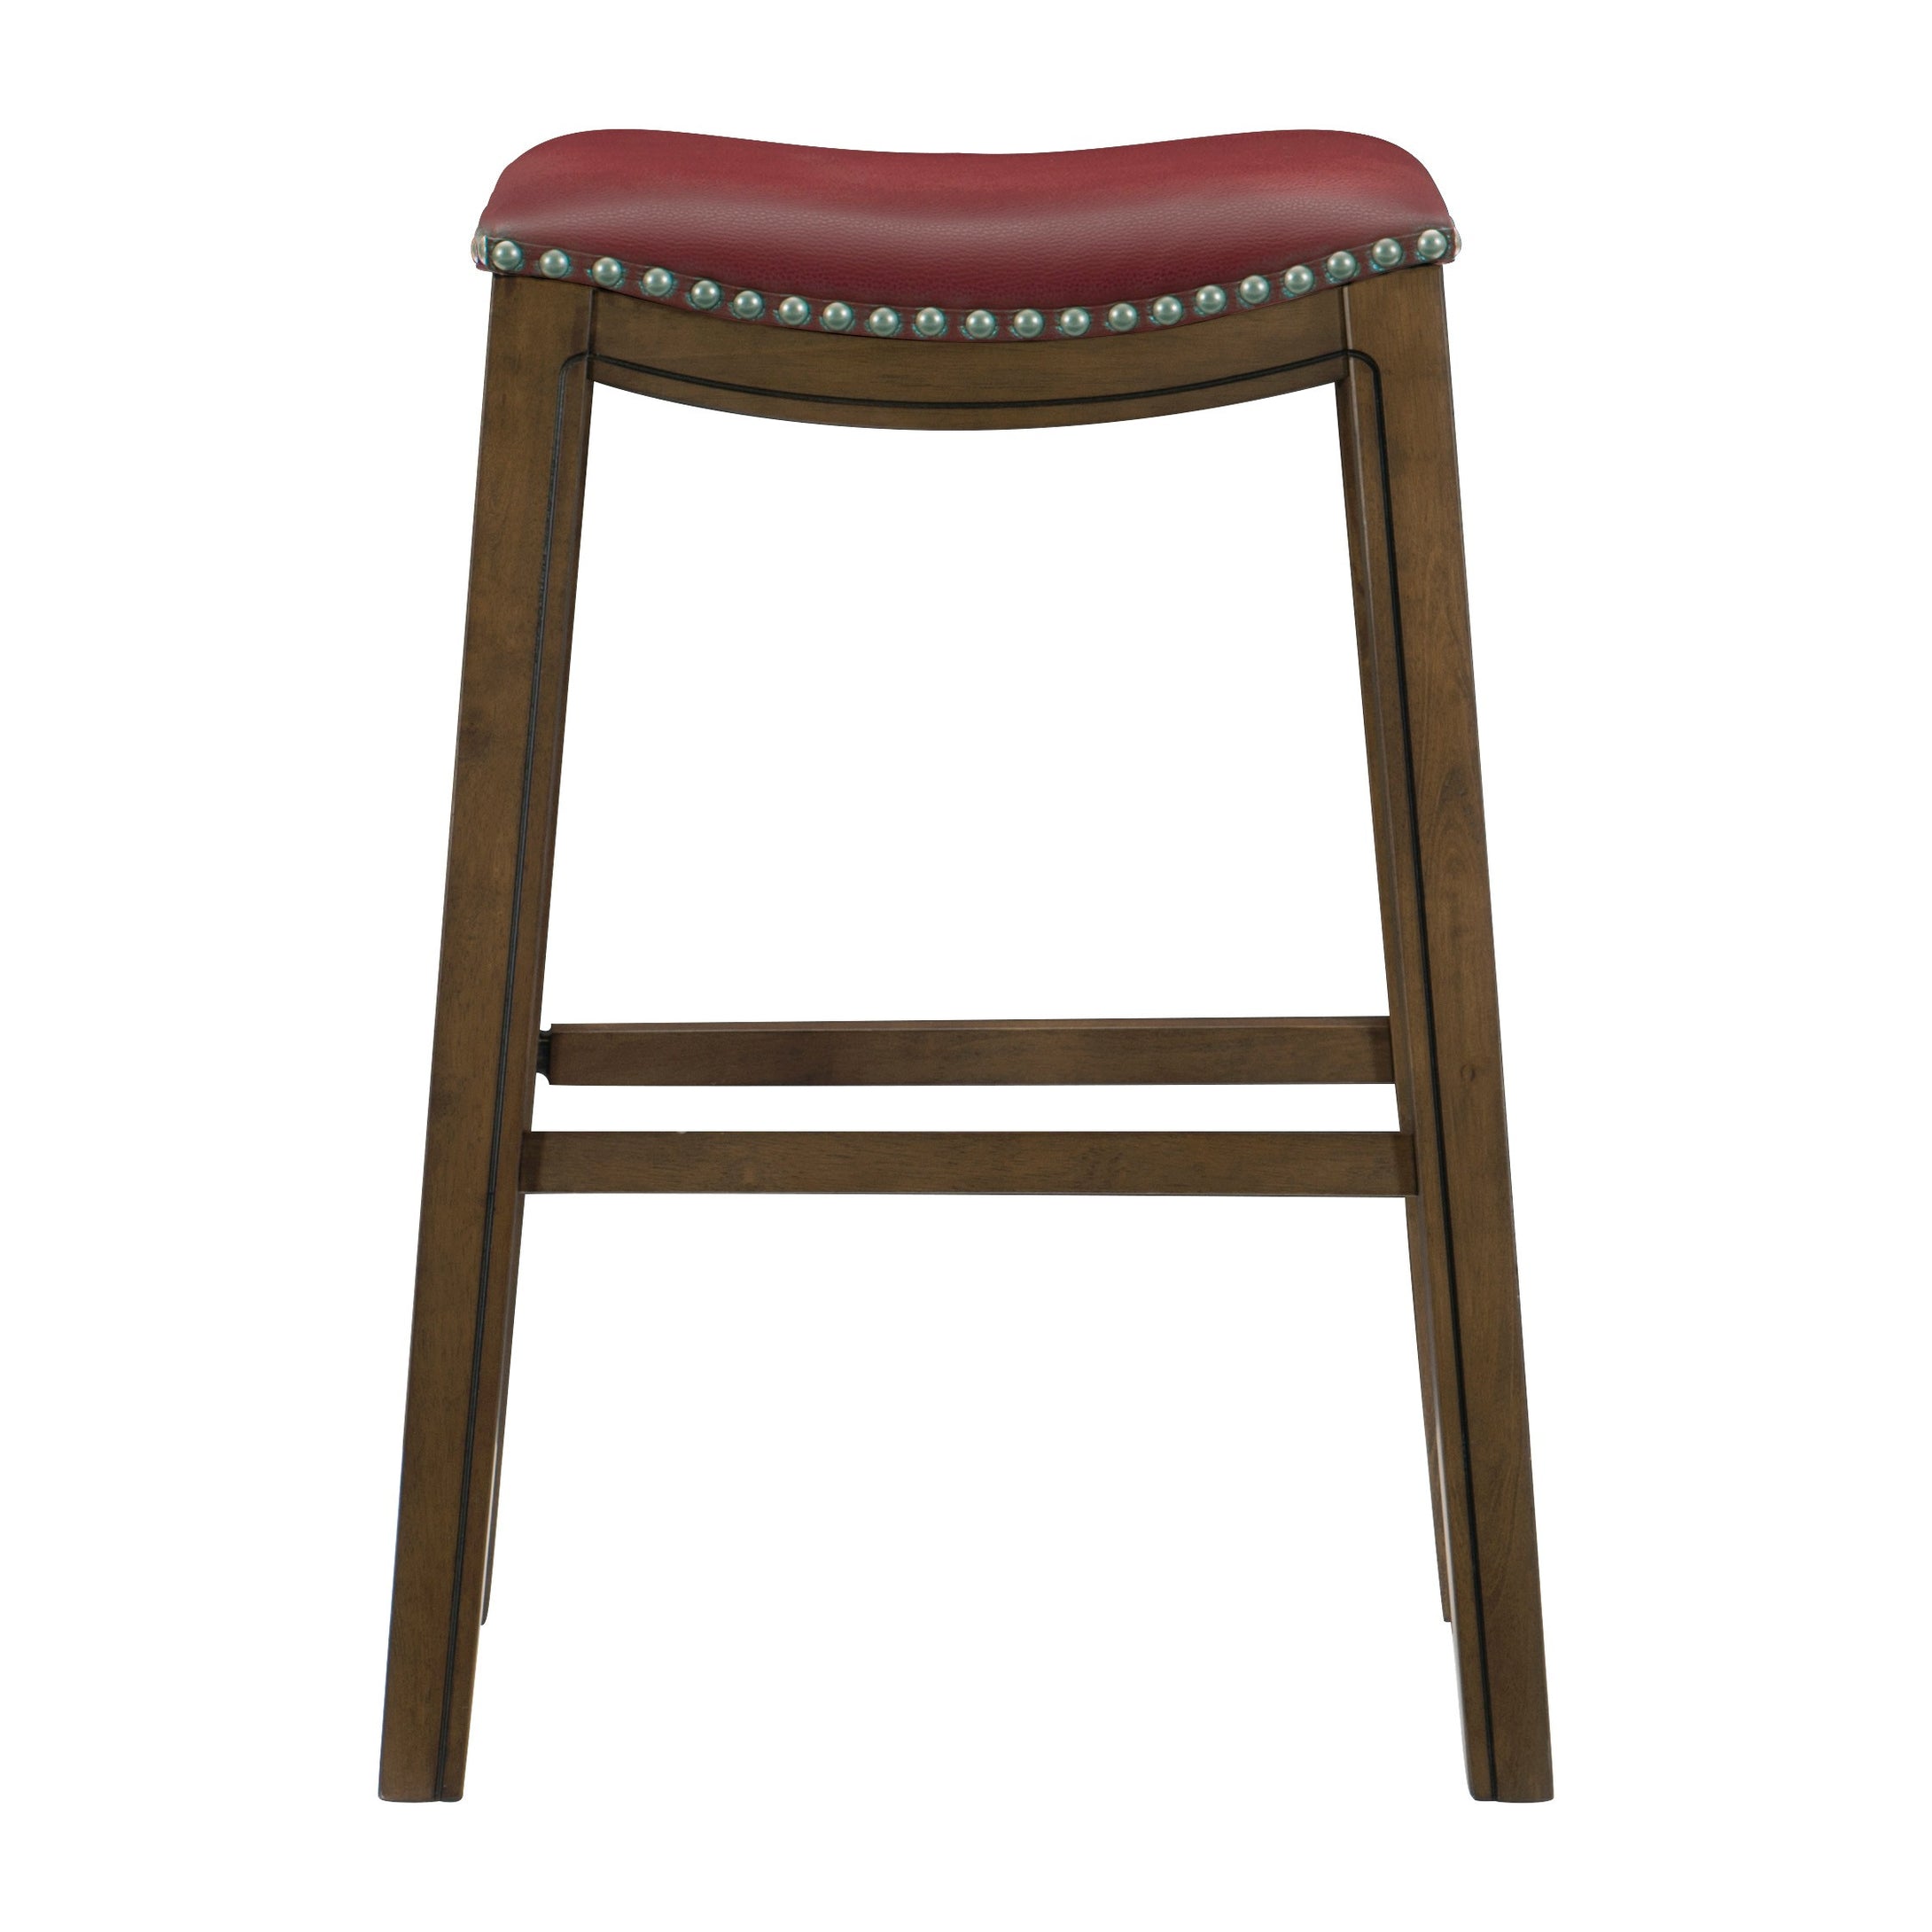 5682RED-29 29 Pub Height Stool, Red